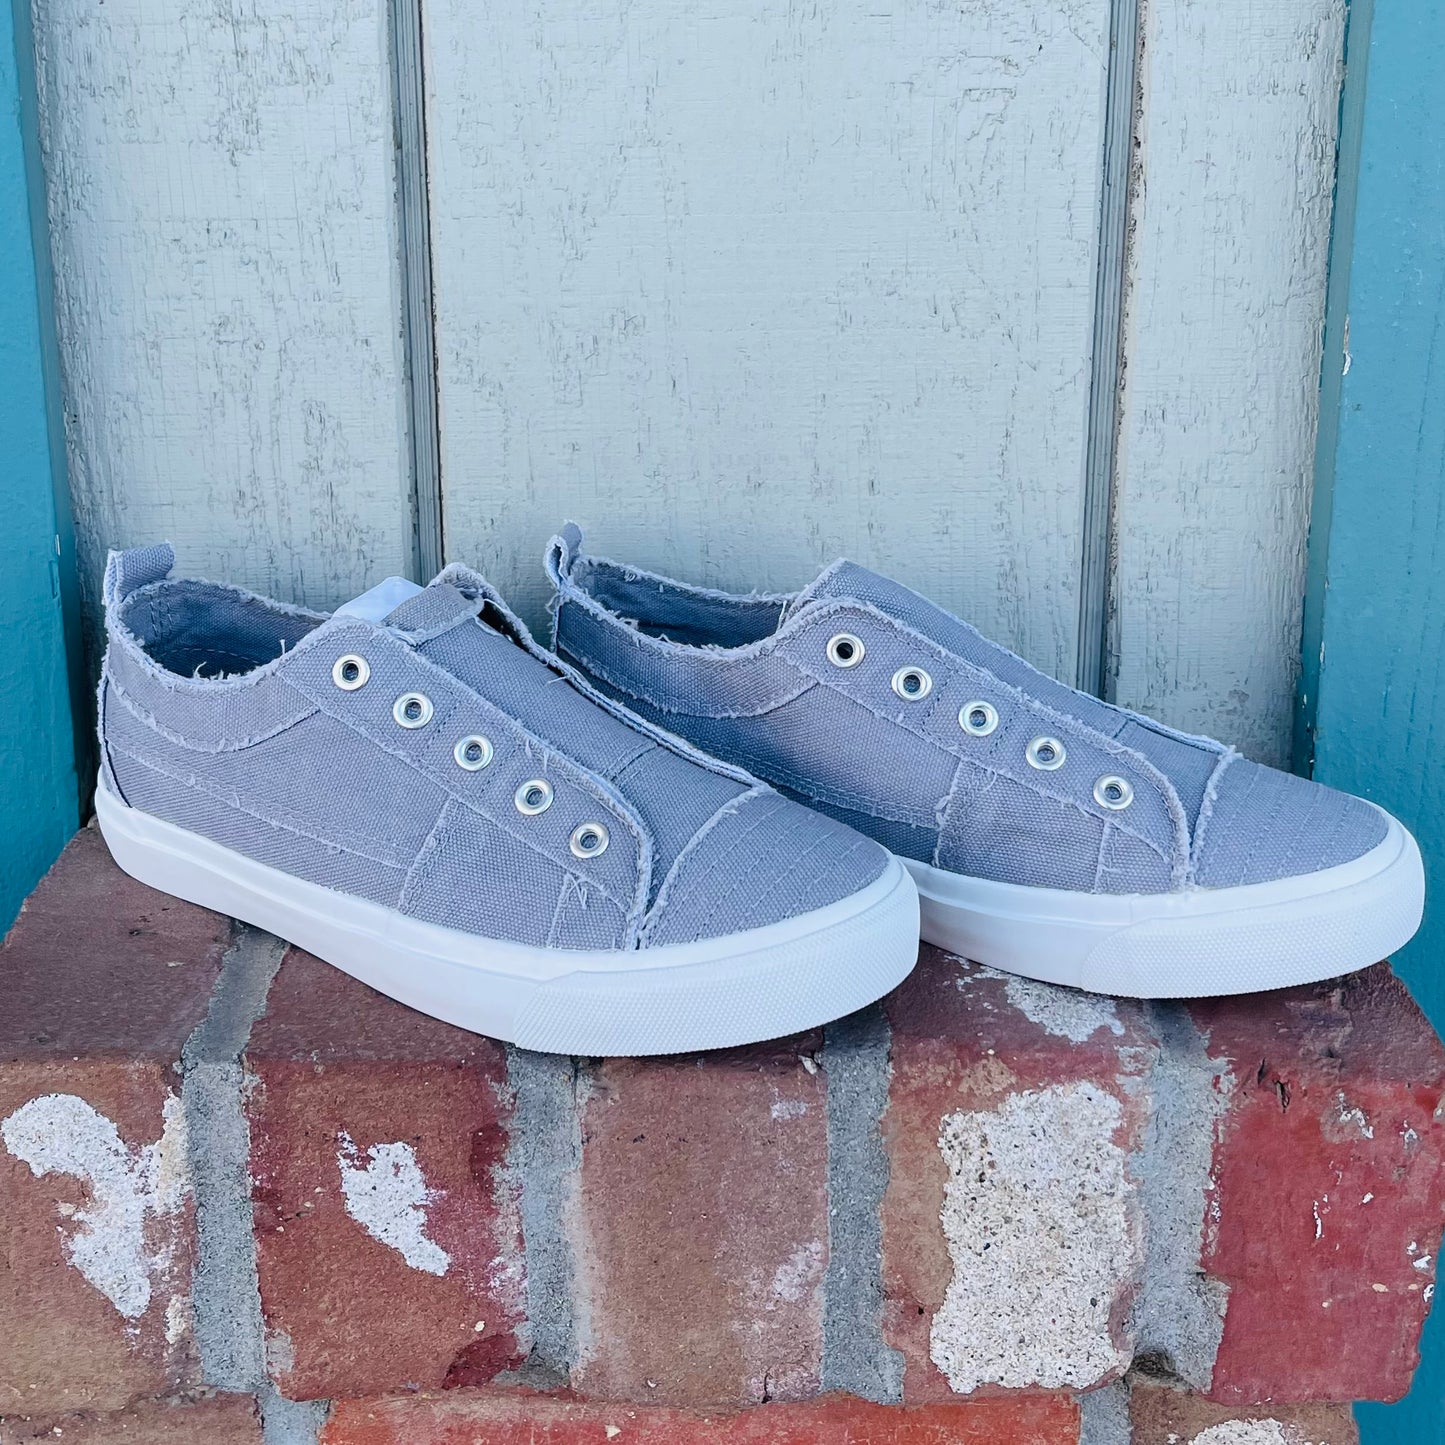 Stormy Skies Canvas Shoe